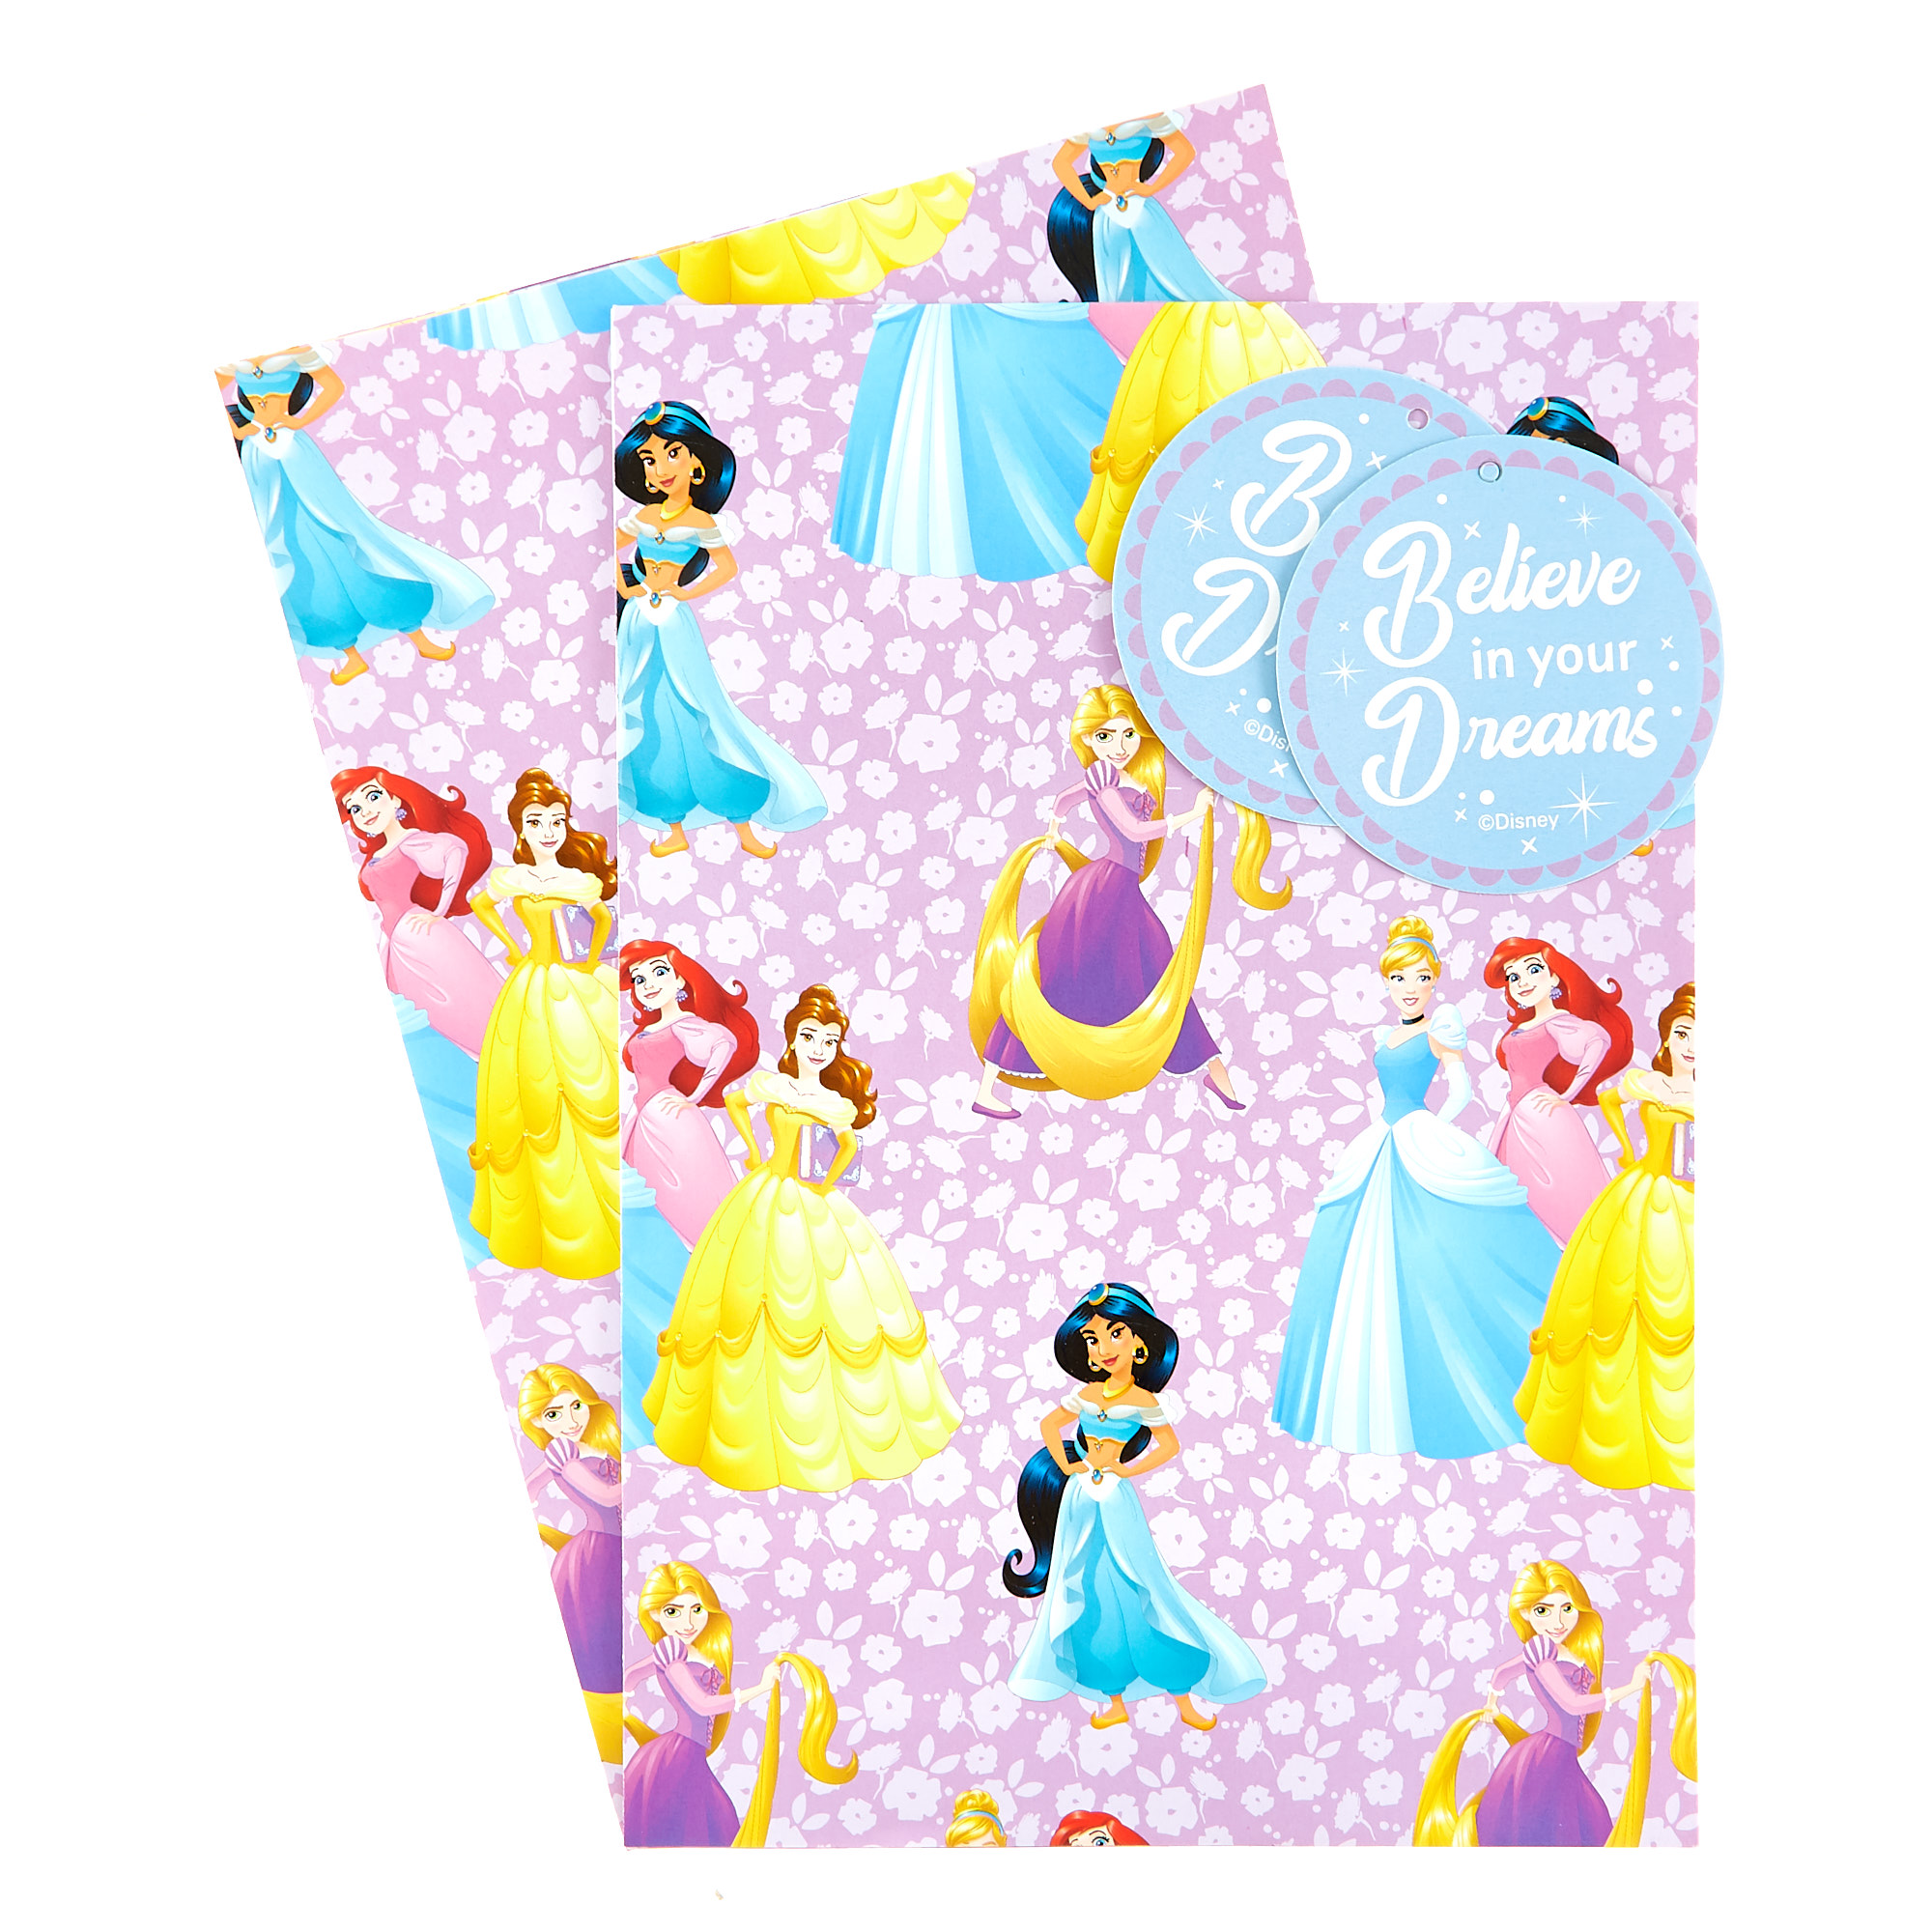 Disney Princess Wrapping Paper & Gift Tags - Pack Of 2